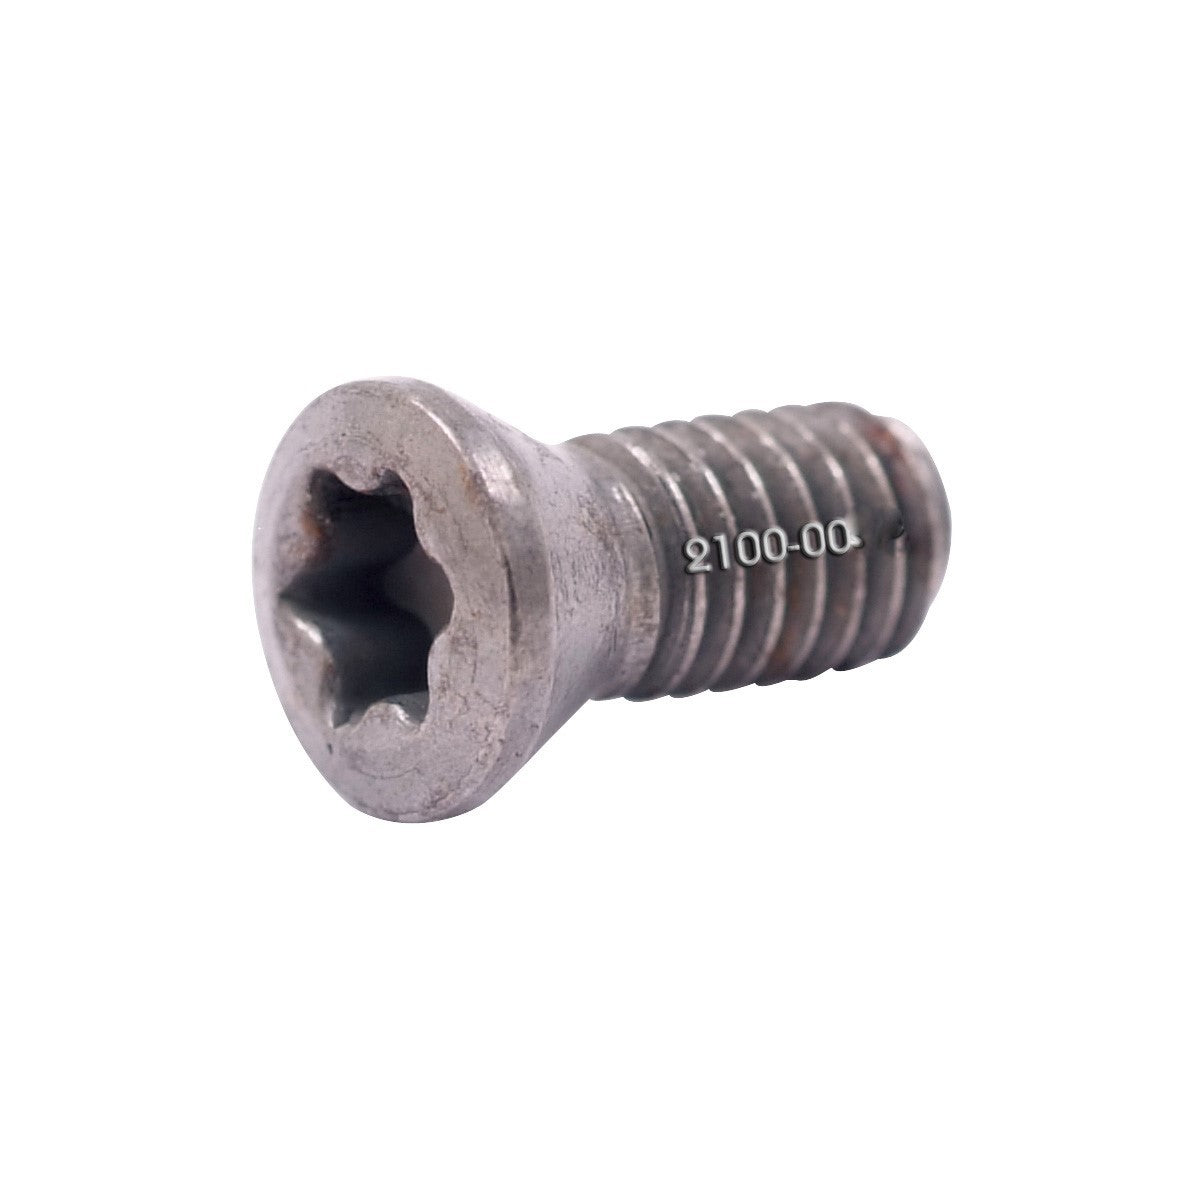 M3.5 X 11MM OVERALL LENGTH SCREW